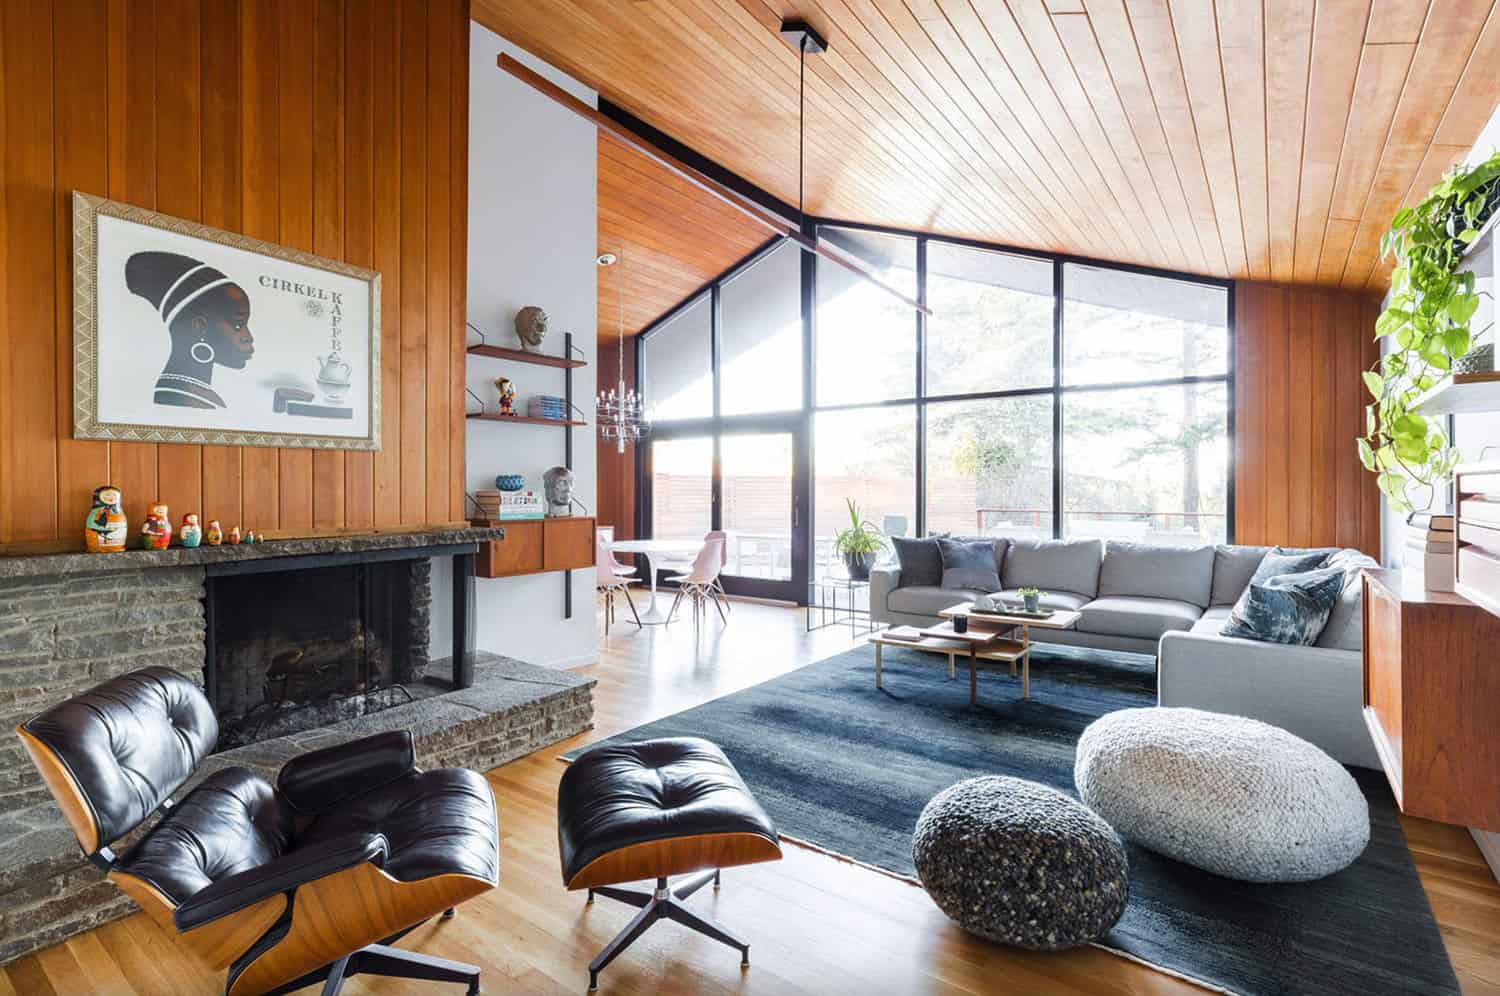 Before & After: Midcentury ranch home gets inspiring makeover in Portland